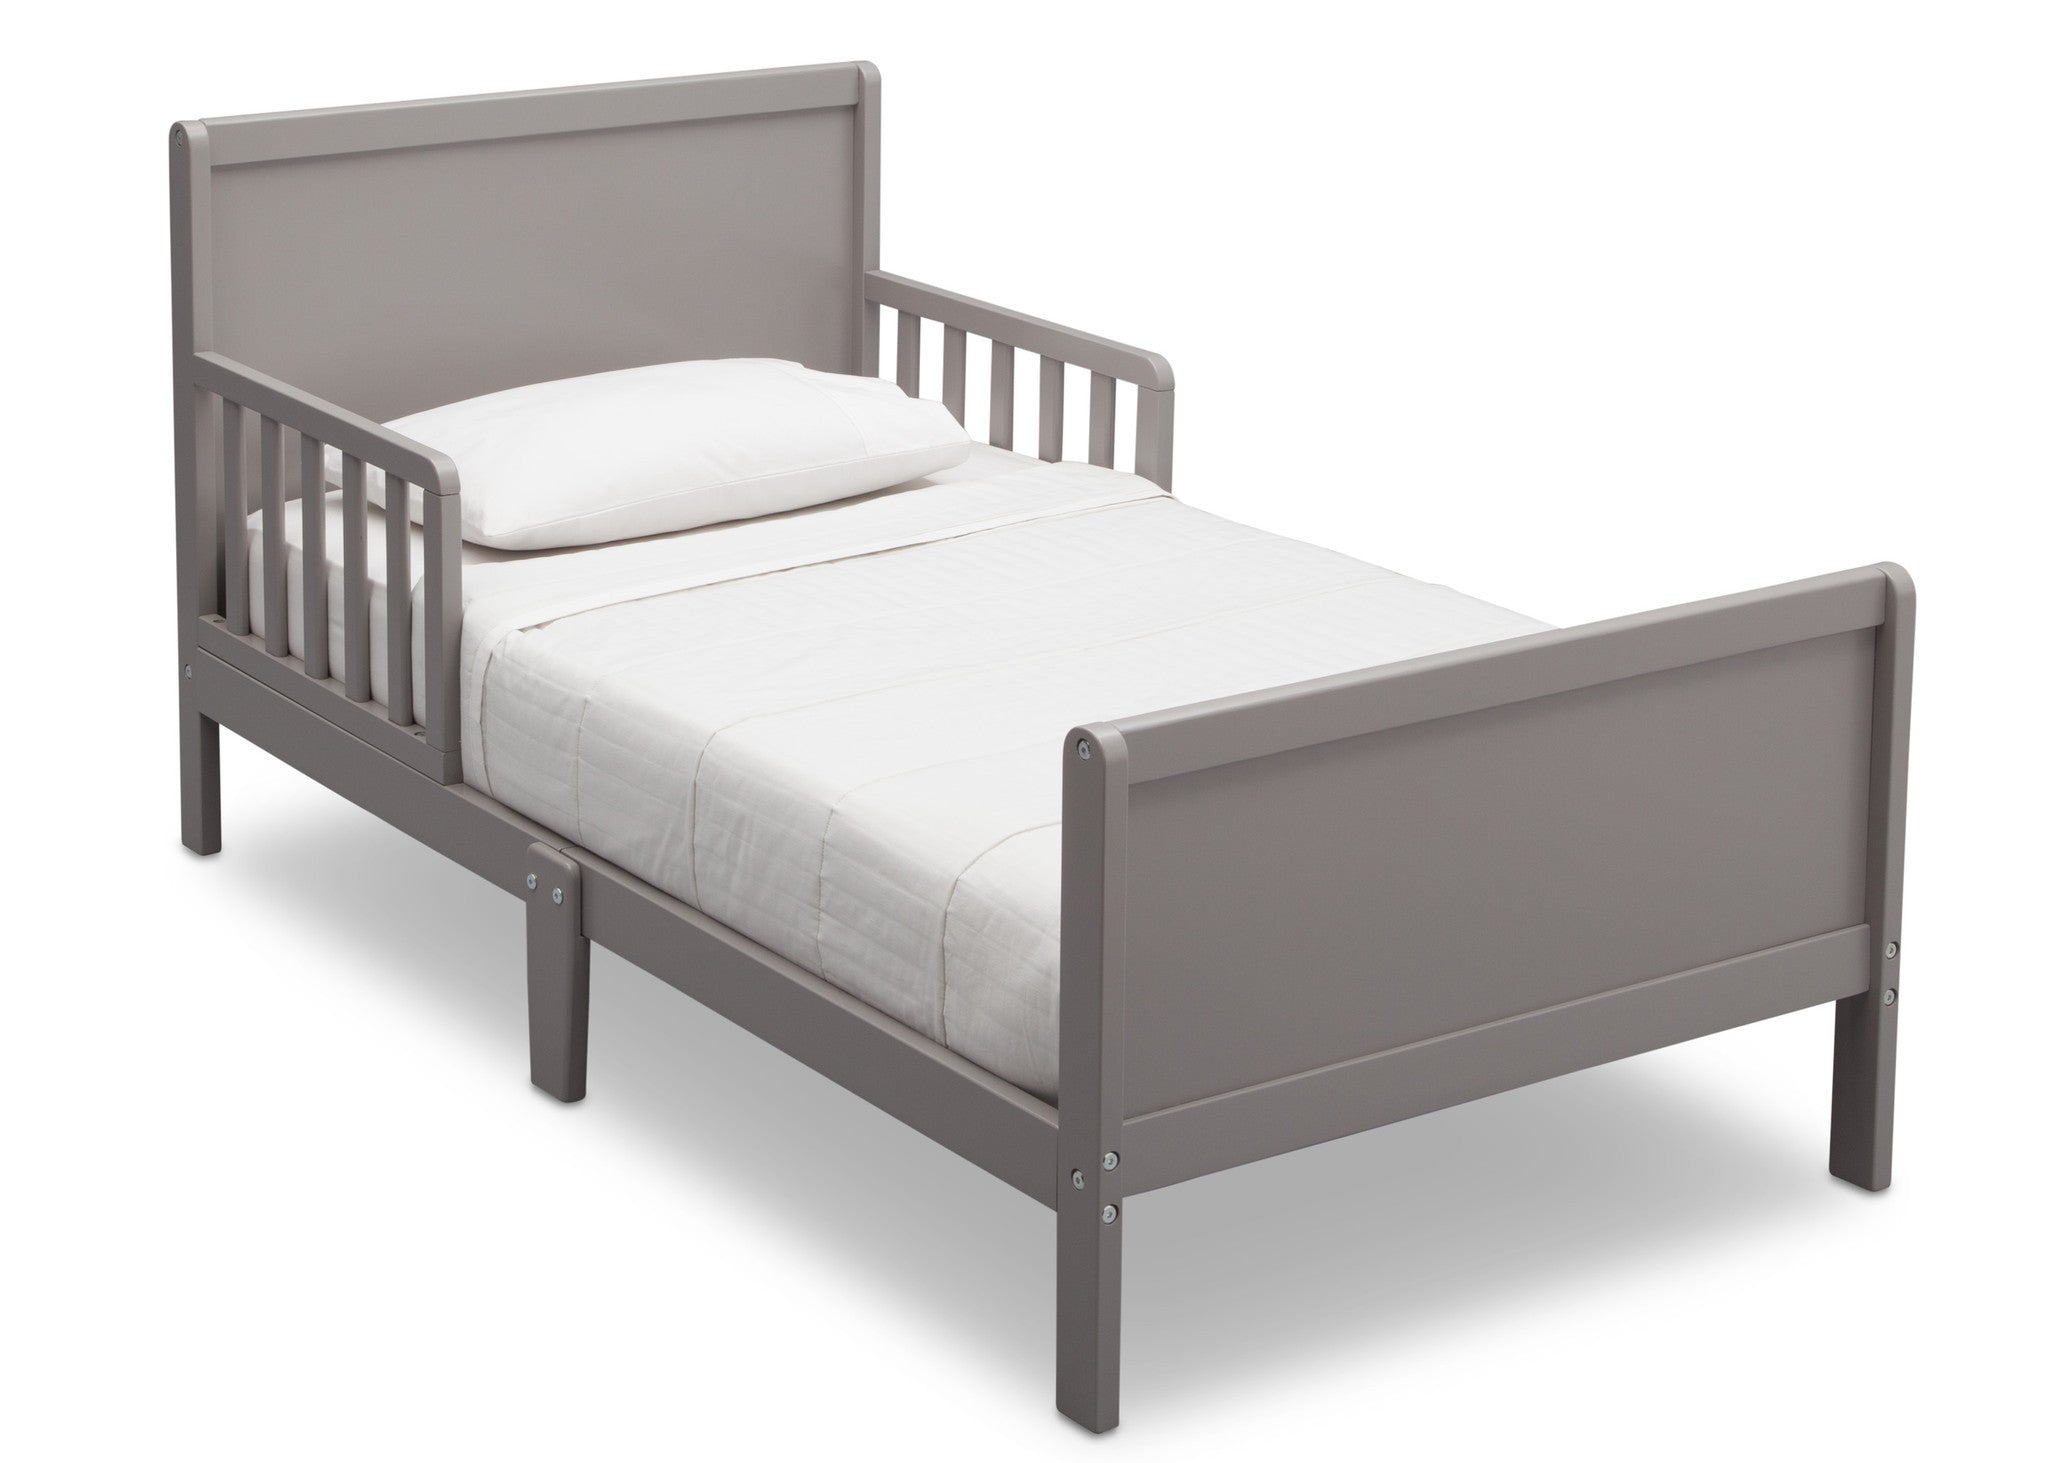 Generic Bonnlo Metal Toddler Bed Frame with Guard Rail, Gray